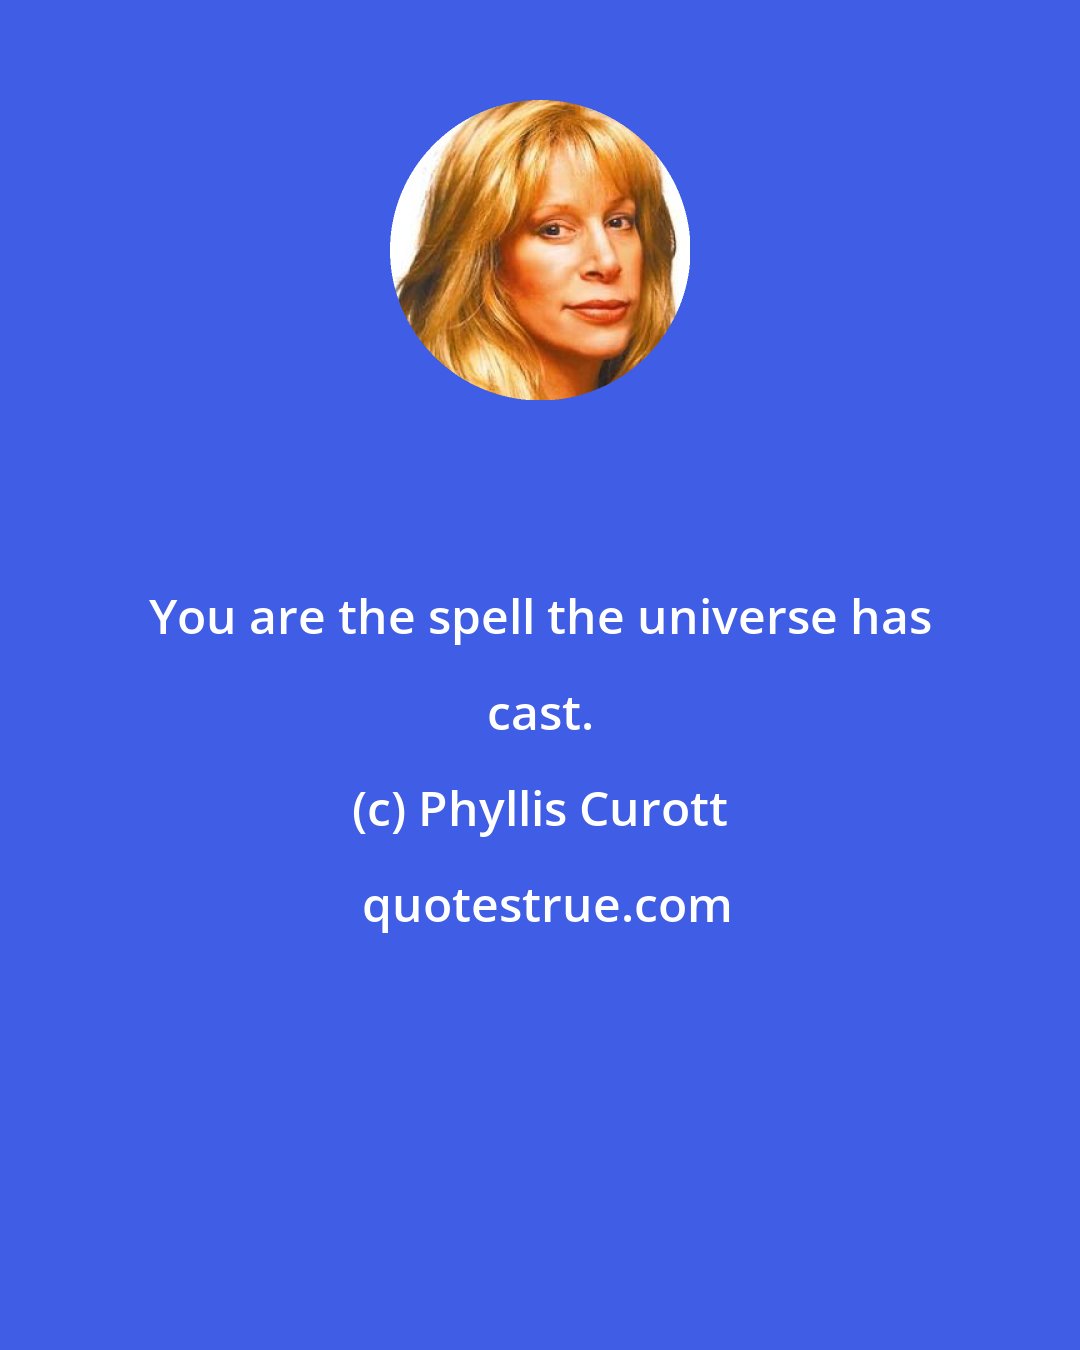 Phyllis Curott: You are the spell the universe has cast.